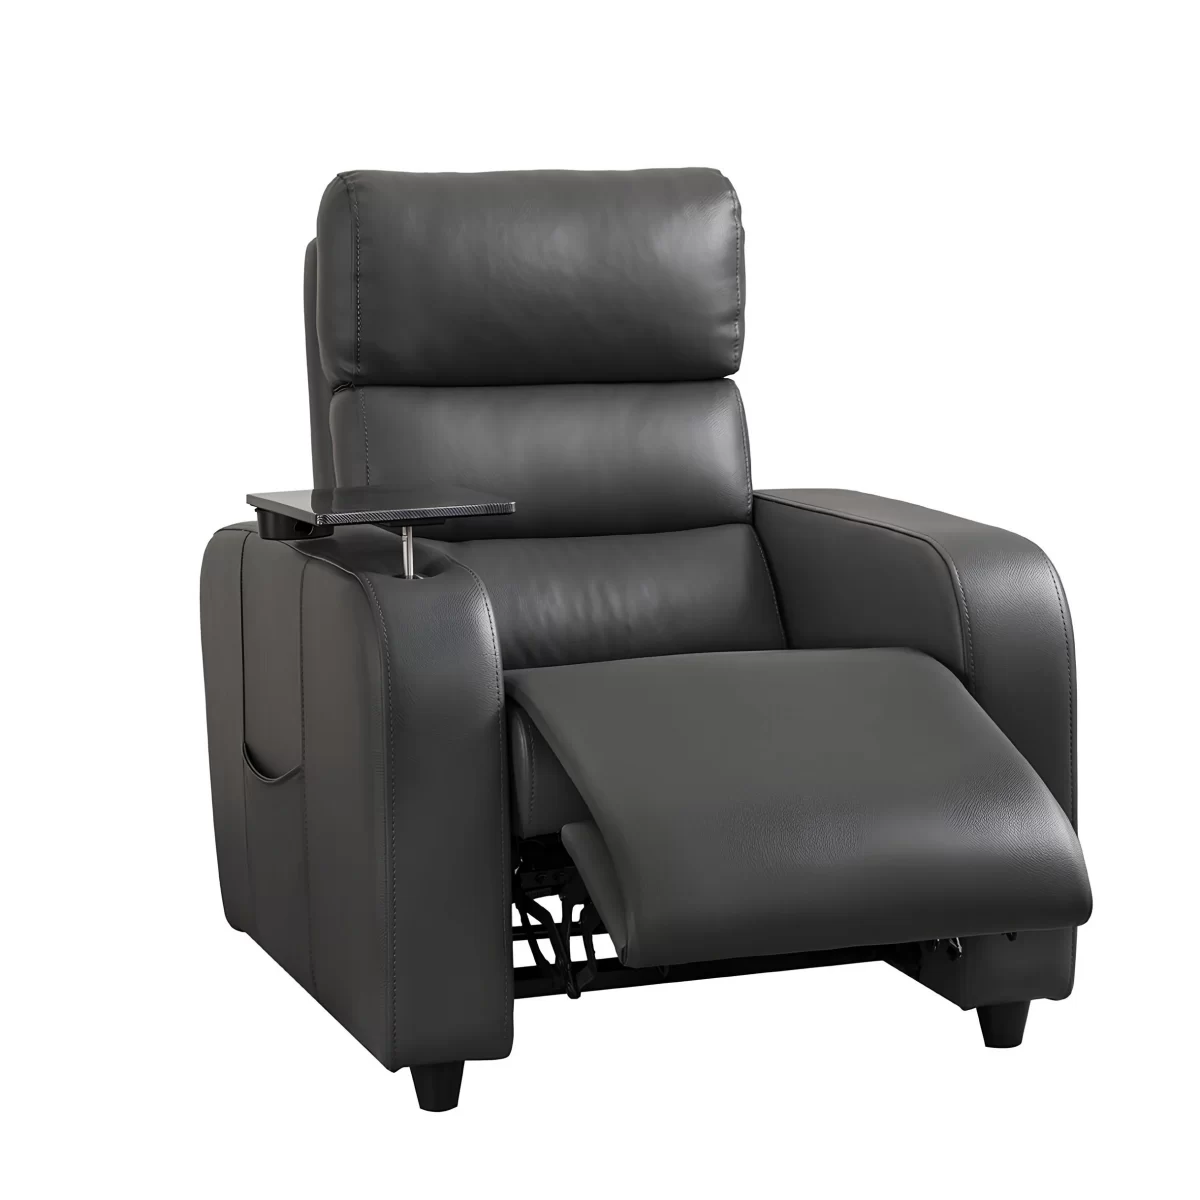 mari reclining sofa tray table electric recliner seat for home theater 2